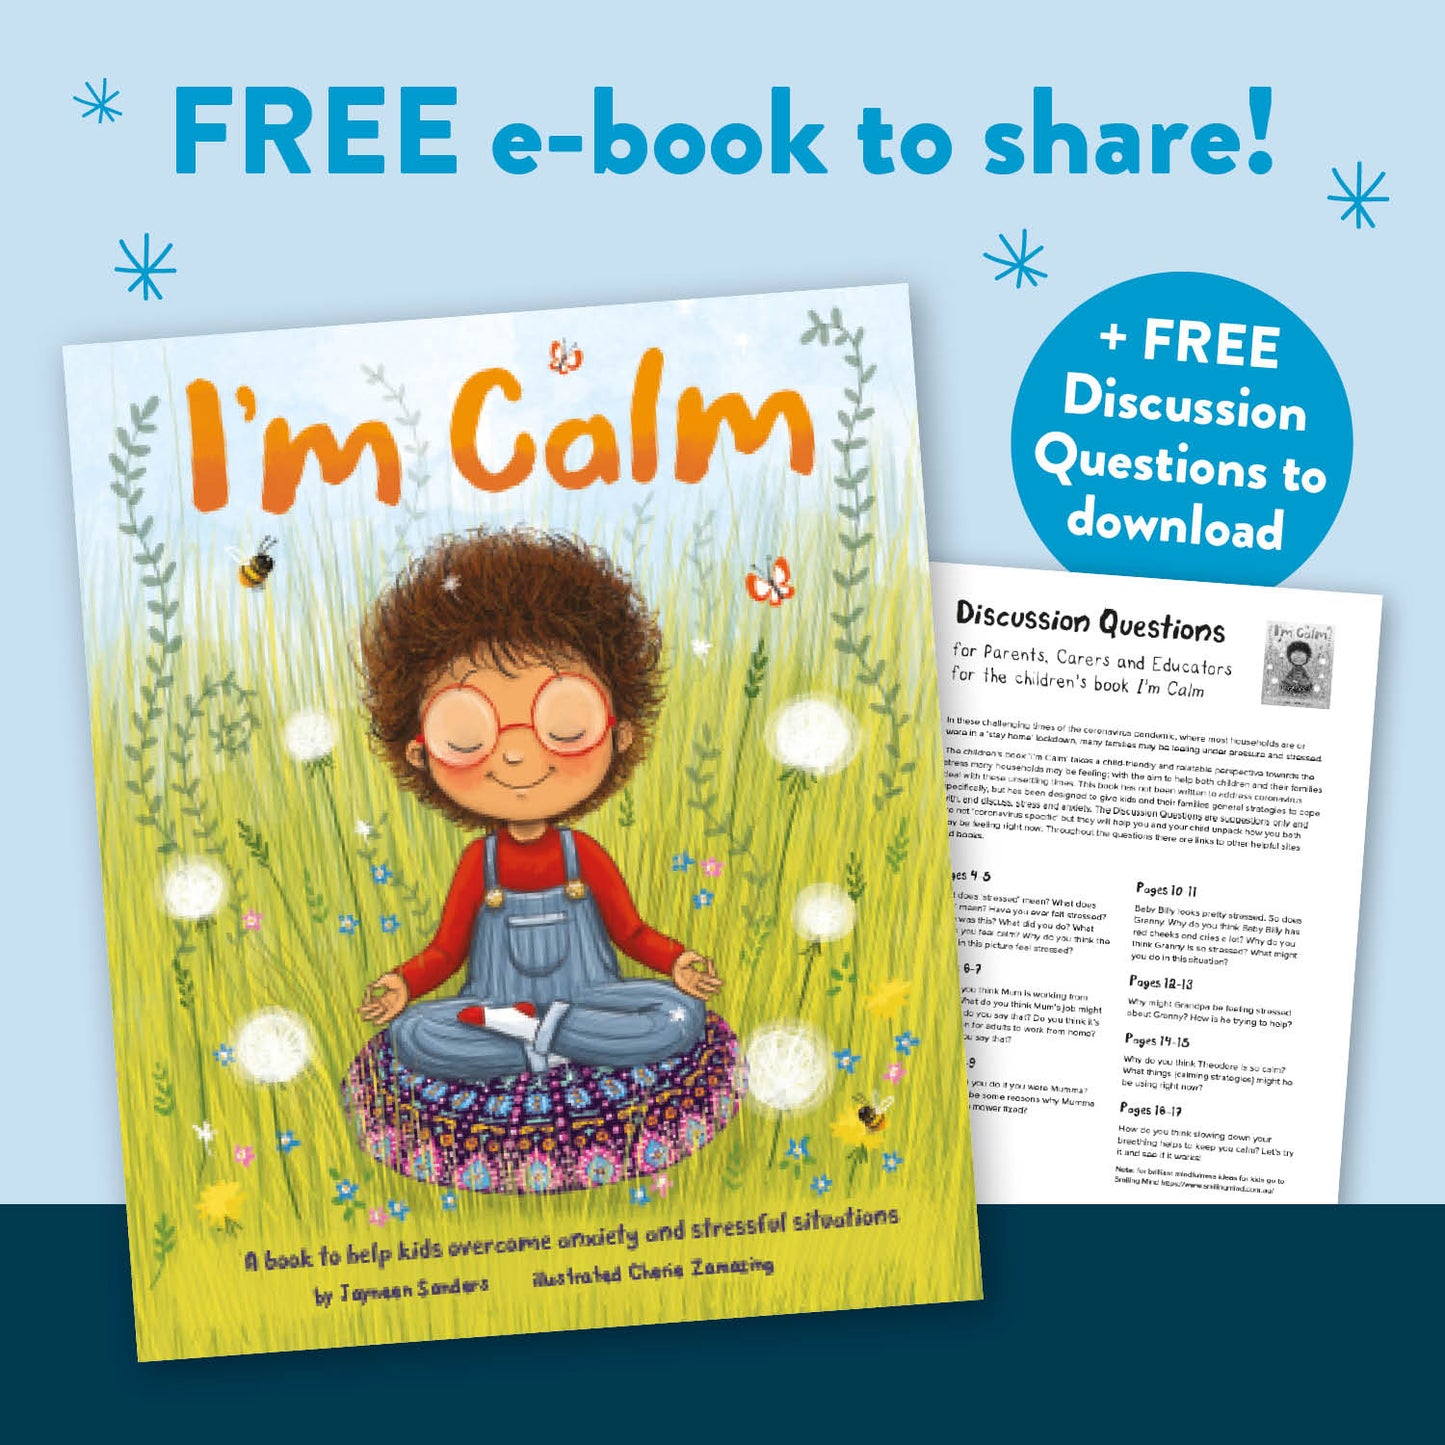 A promotion for a free e-book titled 'I'm Calm'. "Free e-book to share! Plus free discussion questions to download."